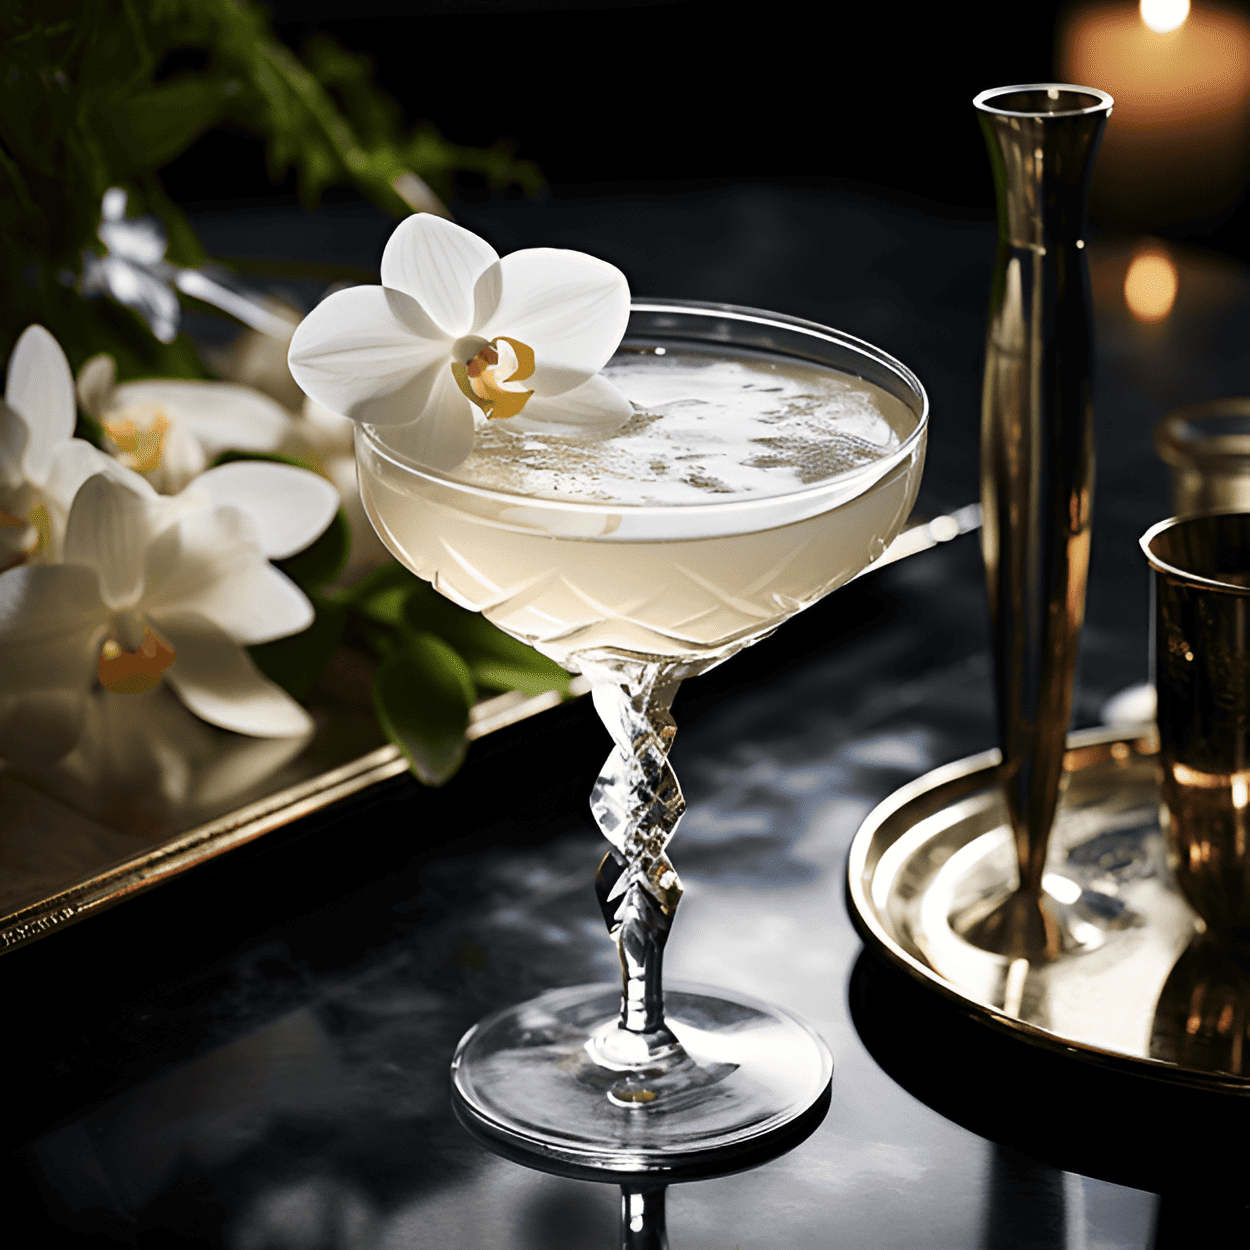 Platinum Blonde Cocktail Recipe - The Platinum Blonde cocktail offers a delightful balance of sweet and sour flavors, with a hint of bitterness from the orange liqueur. It is a smooth, refreshing, and light drink that leaves a pleasant citrusy aftertaste.